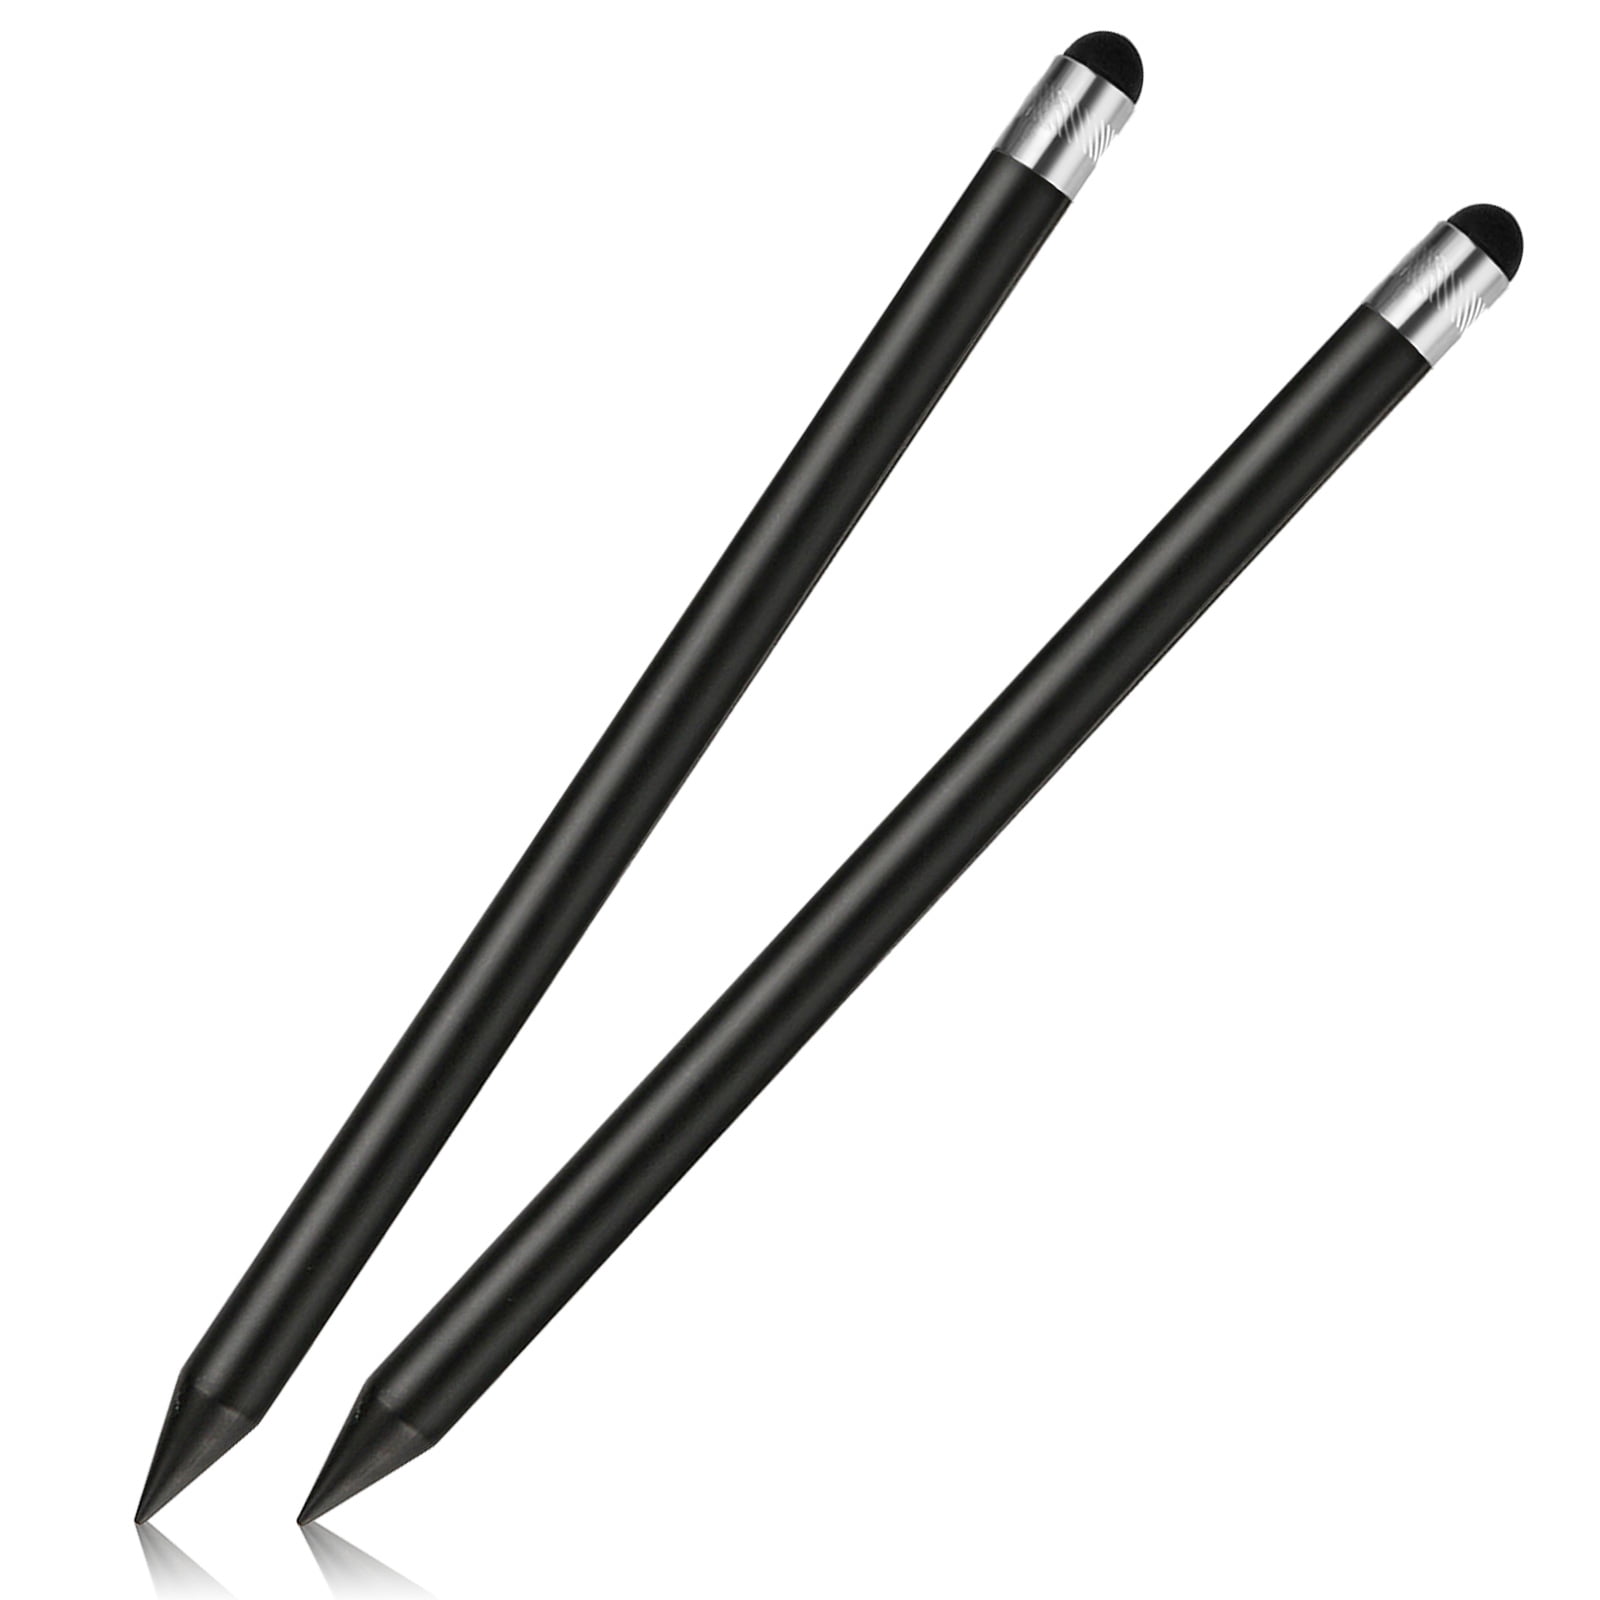 Stylus Pen for iPad suitable for capacitive displays